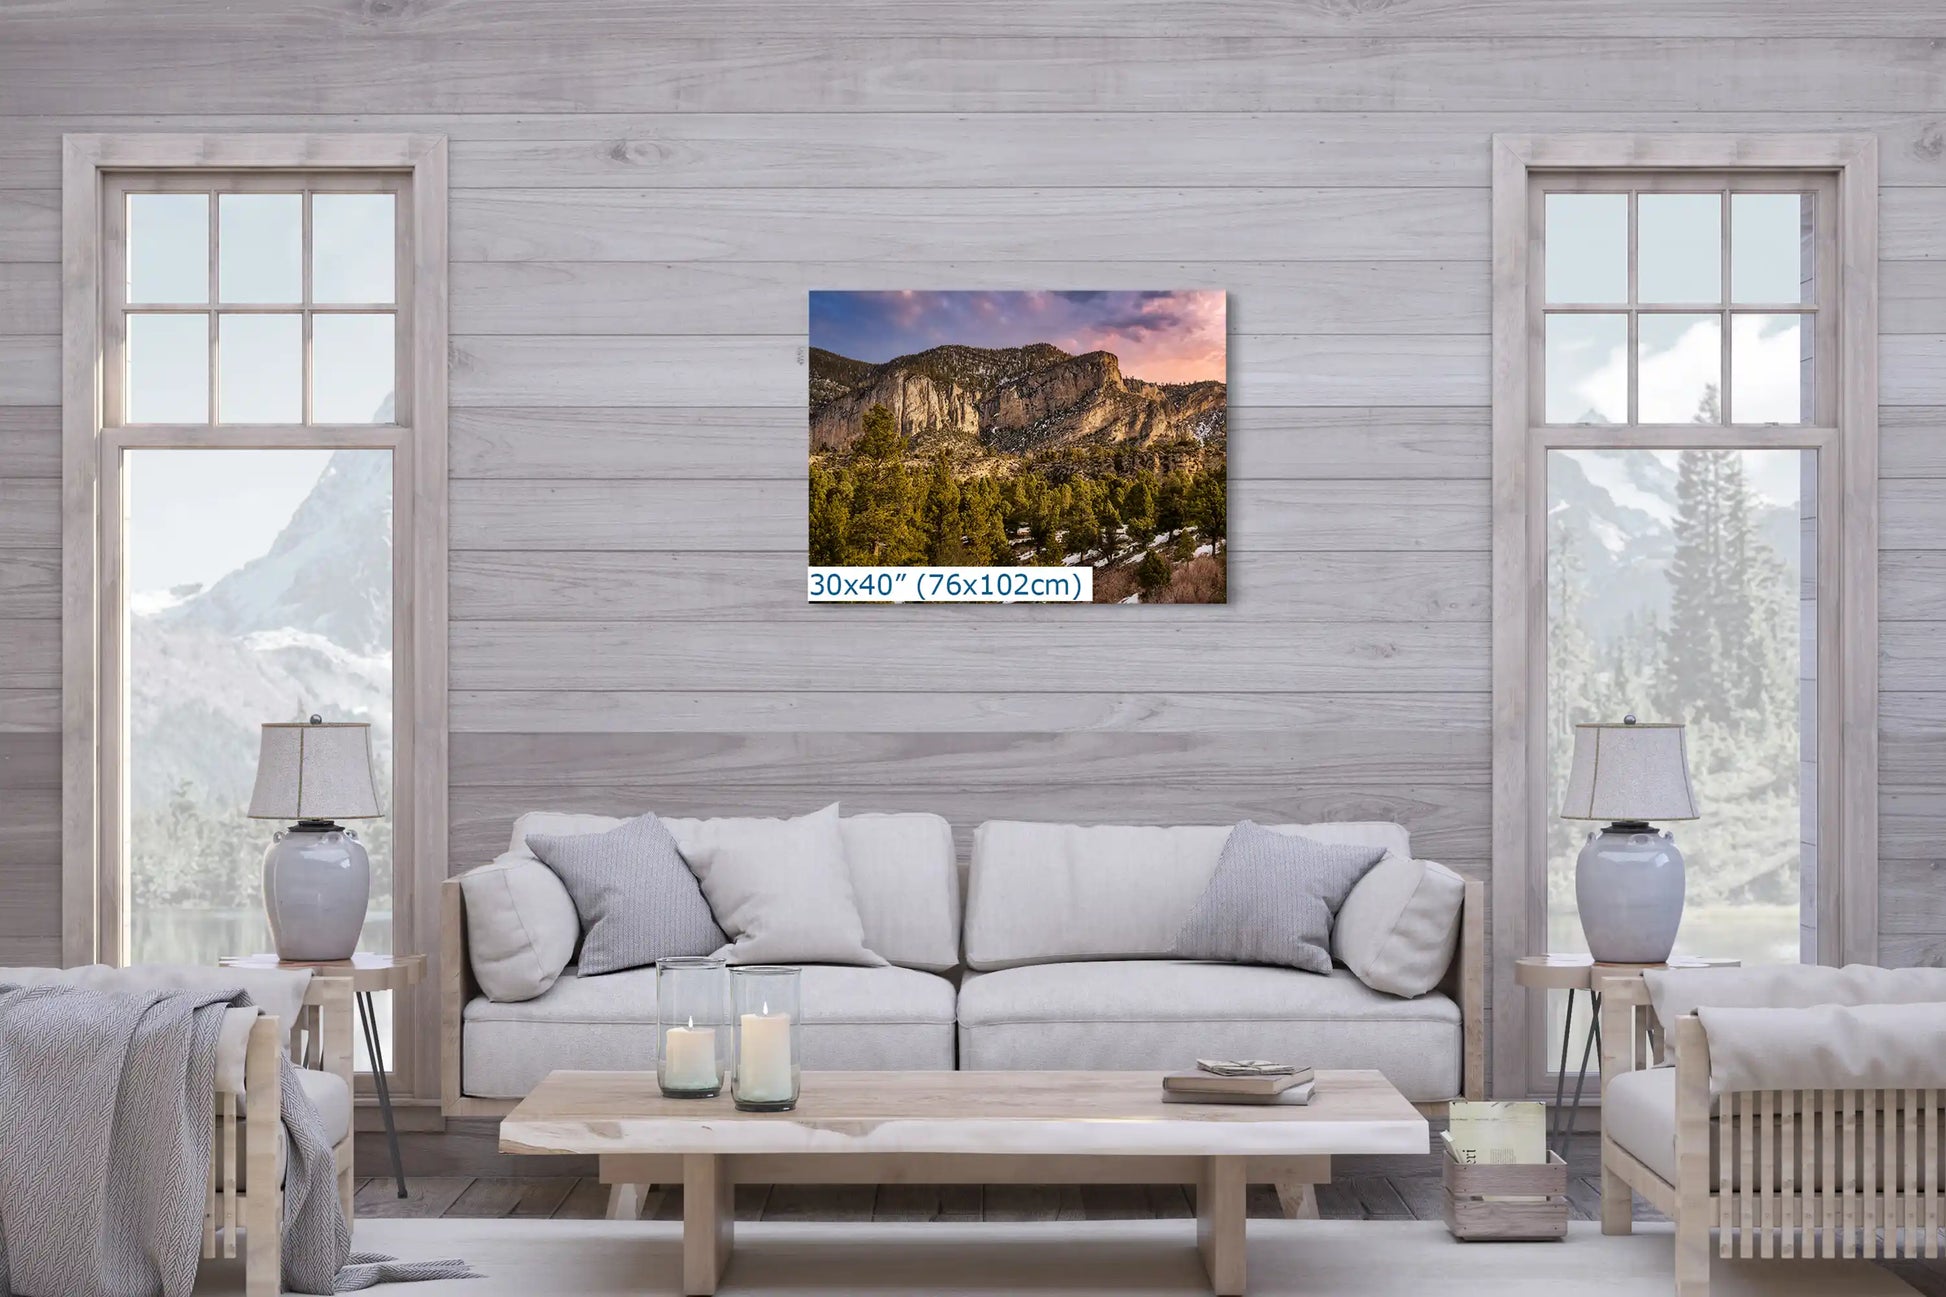 A grand 30x40 canvas capturing the serene majesty of Fletcher Peak at Mt Charleston adorns the living room, infusing the space with a meditative and mesmerizing aura.